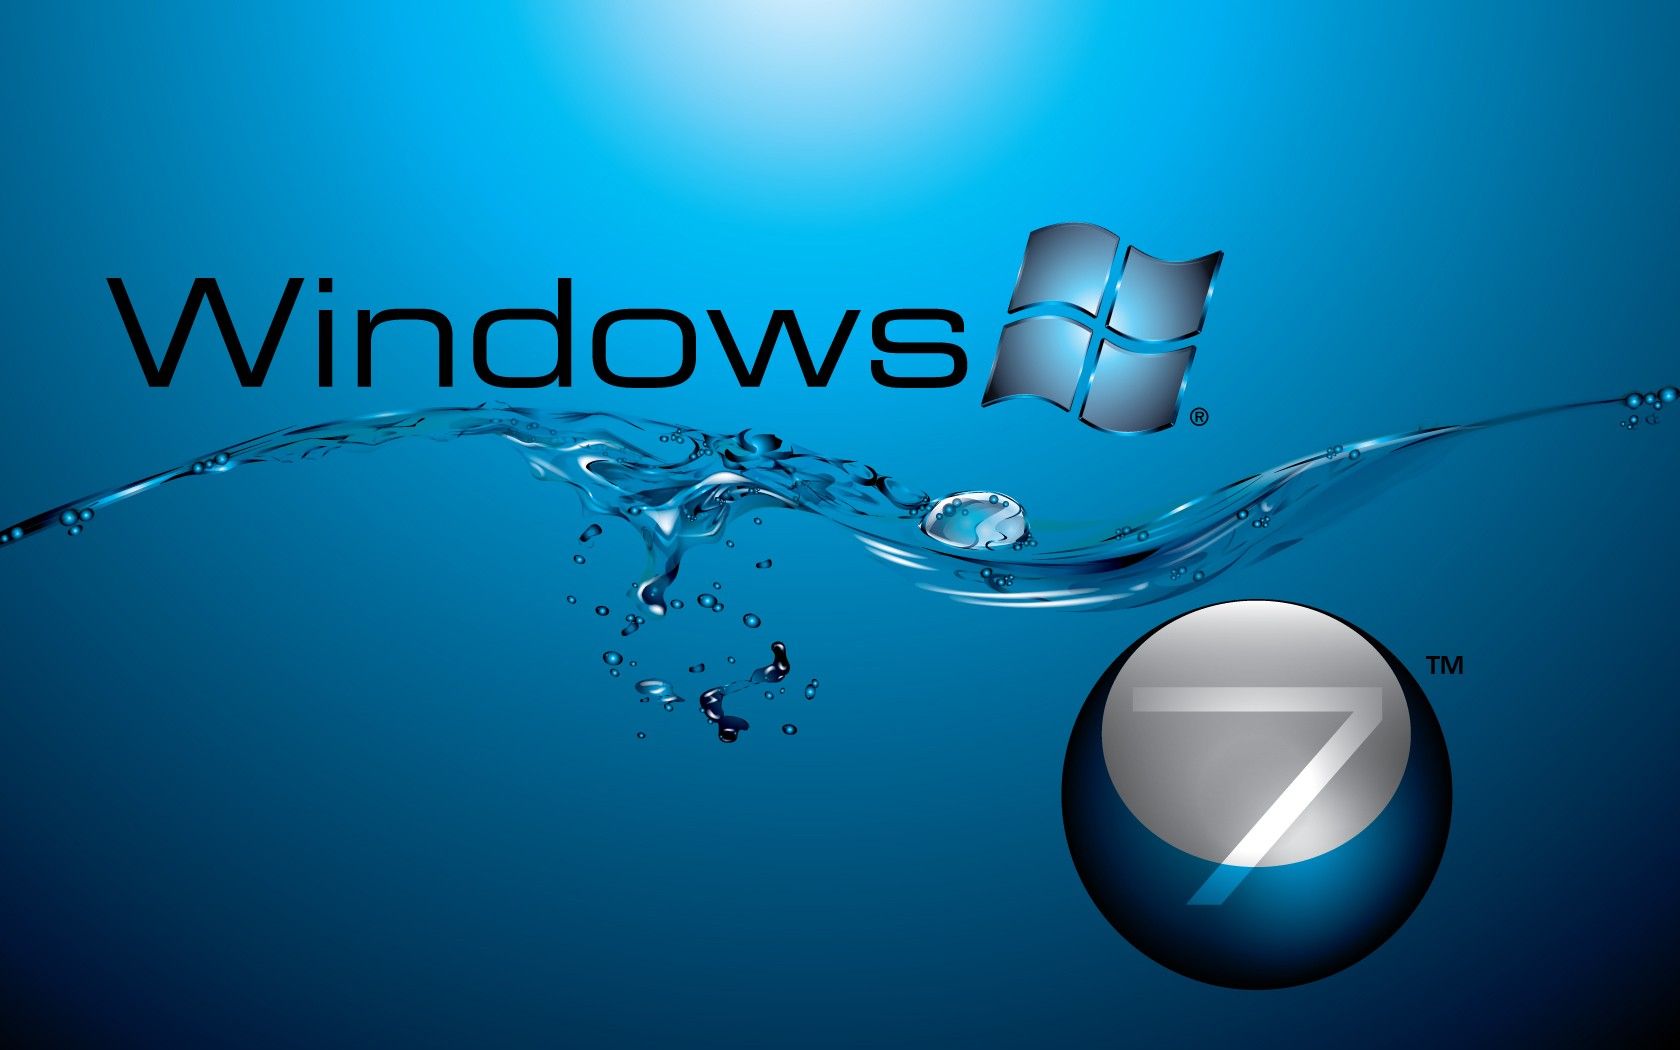 HD Wallpapers for Windows 7 Widescreen